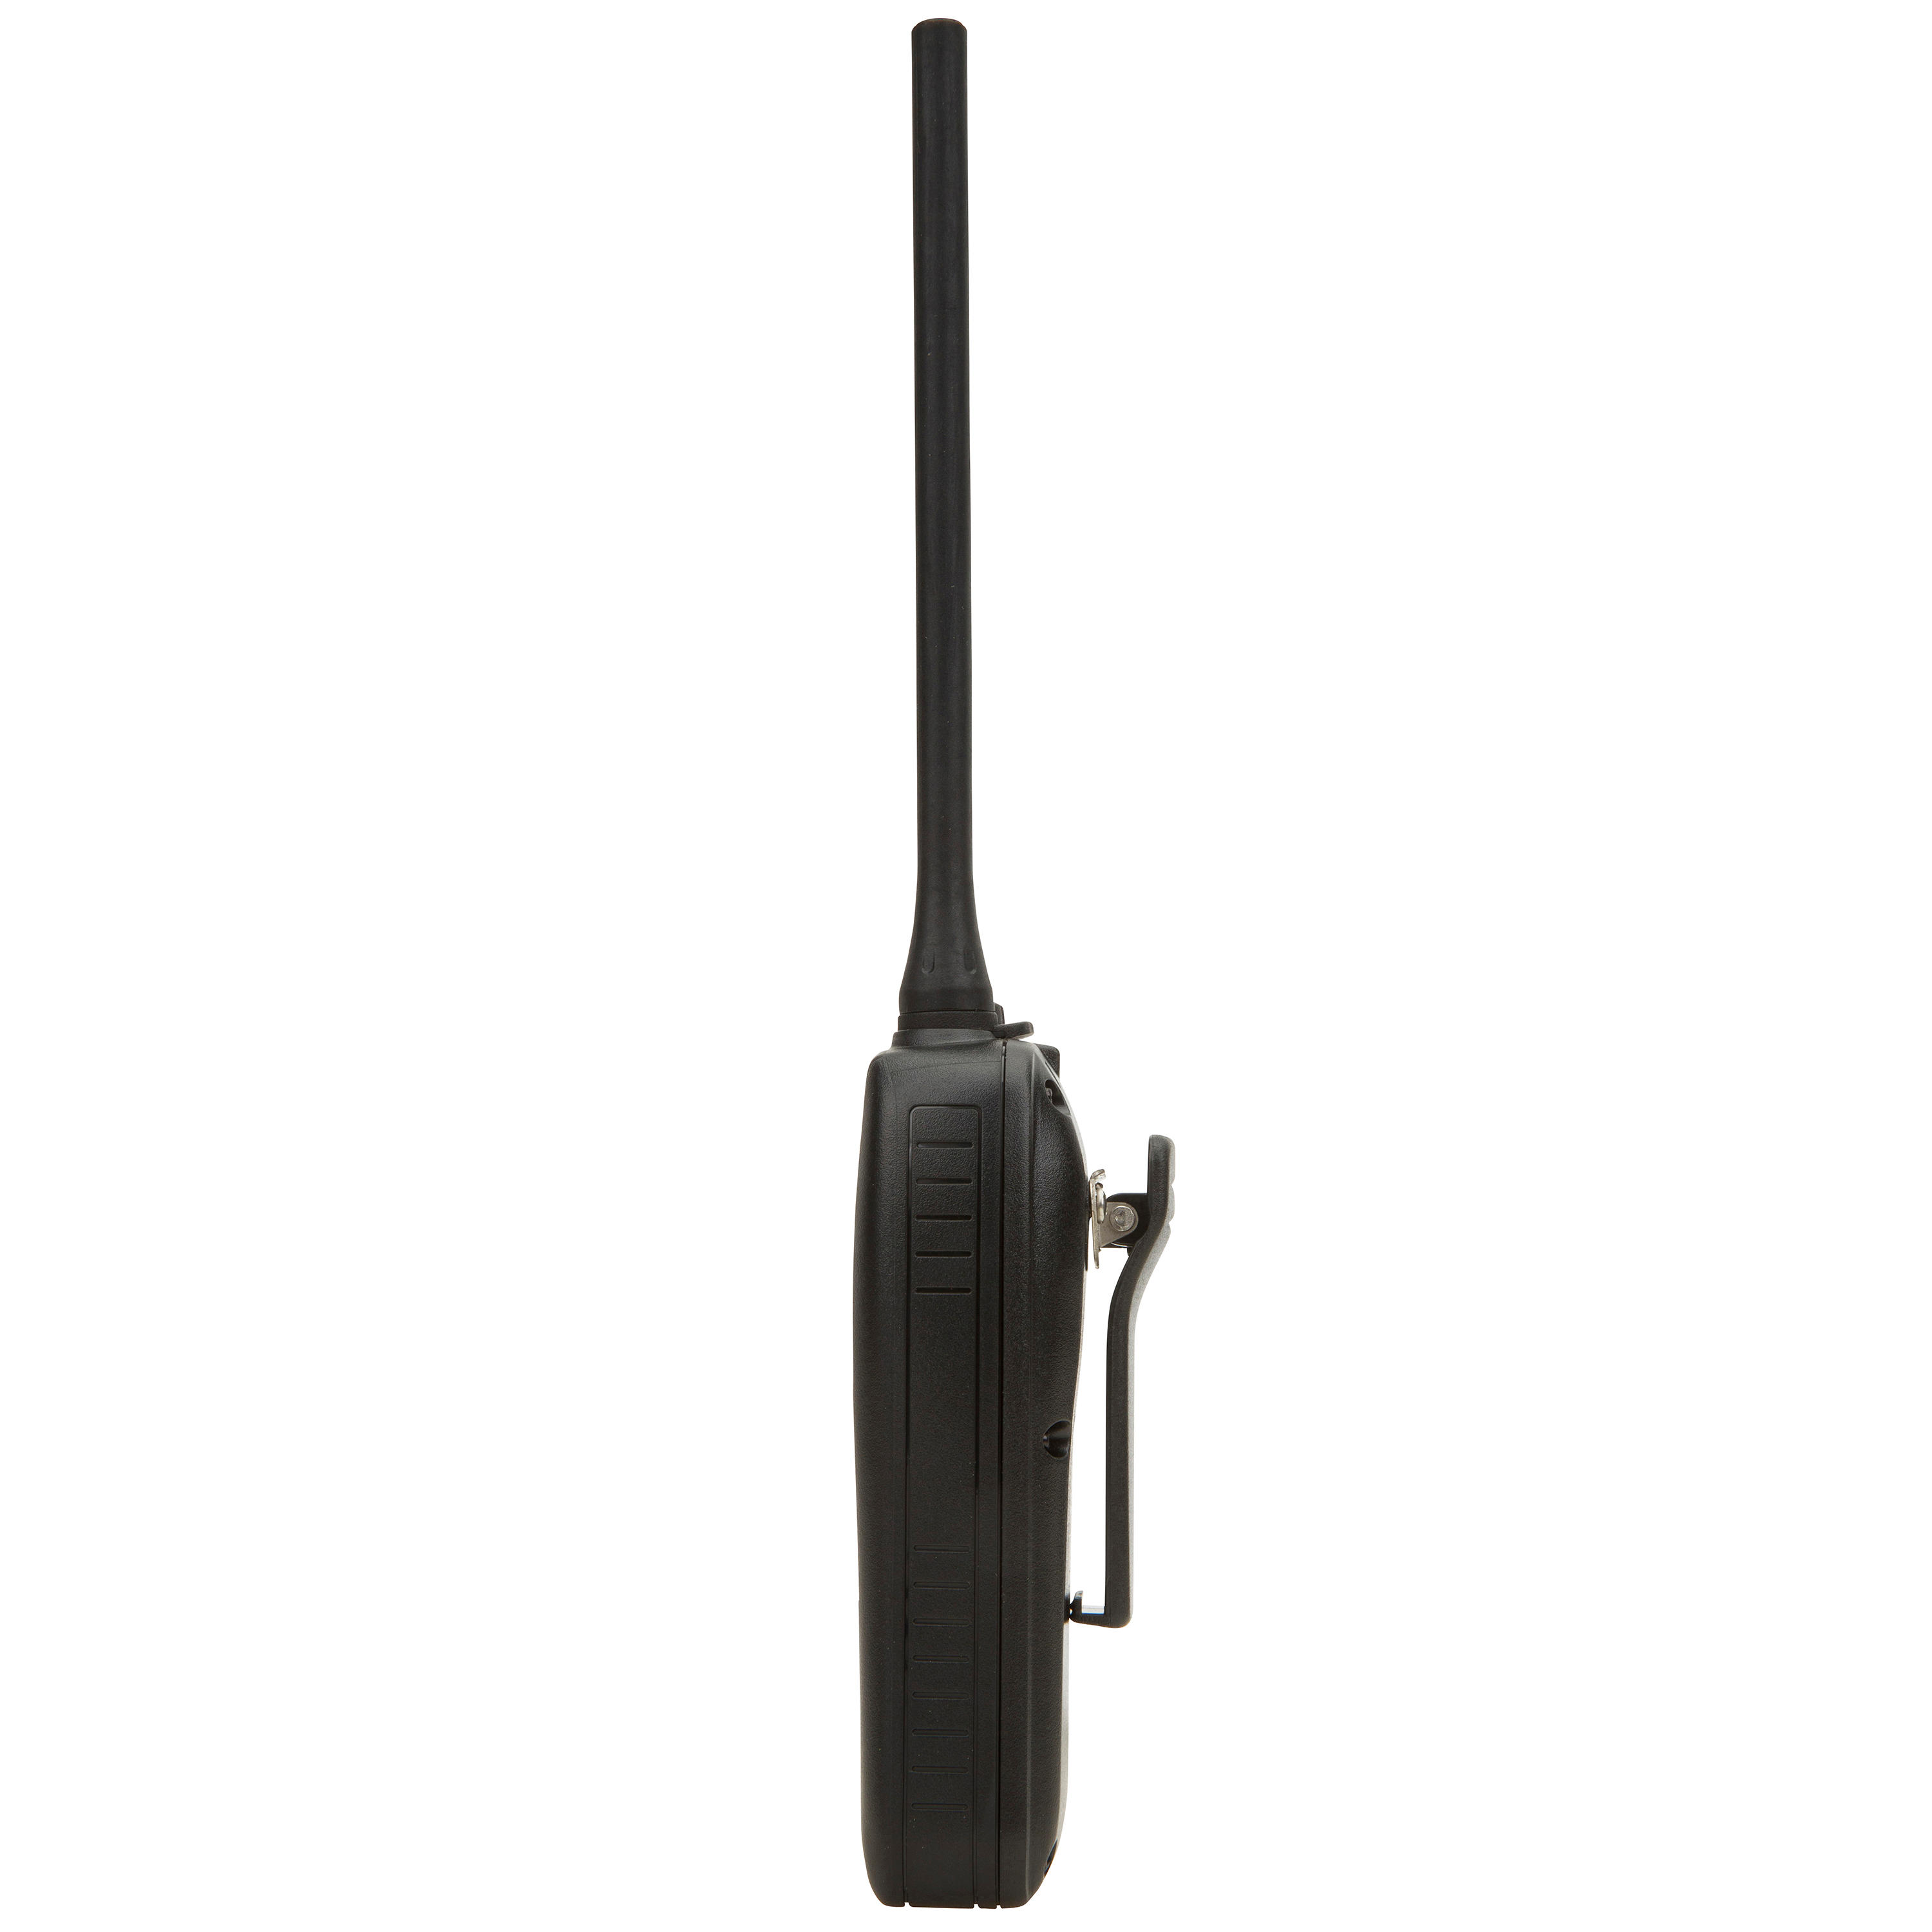 FLOATING VHF SX-400, WATERPROOF to IPX7 with flash and alarm 5/6